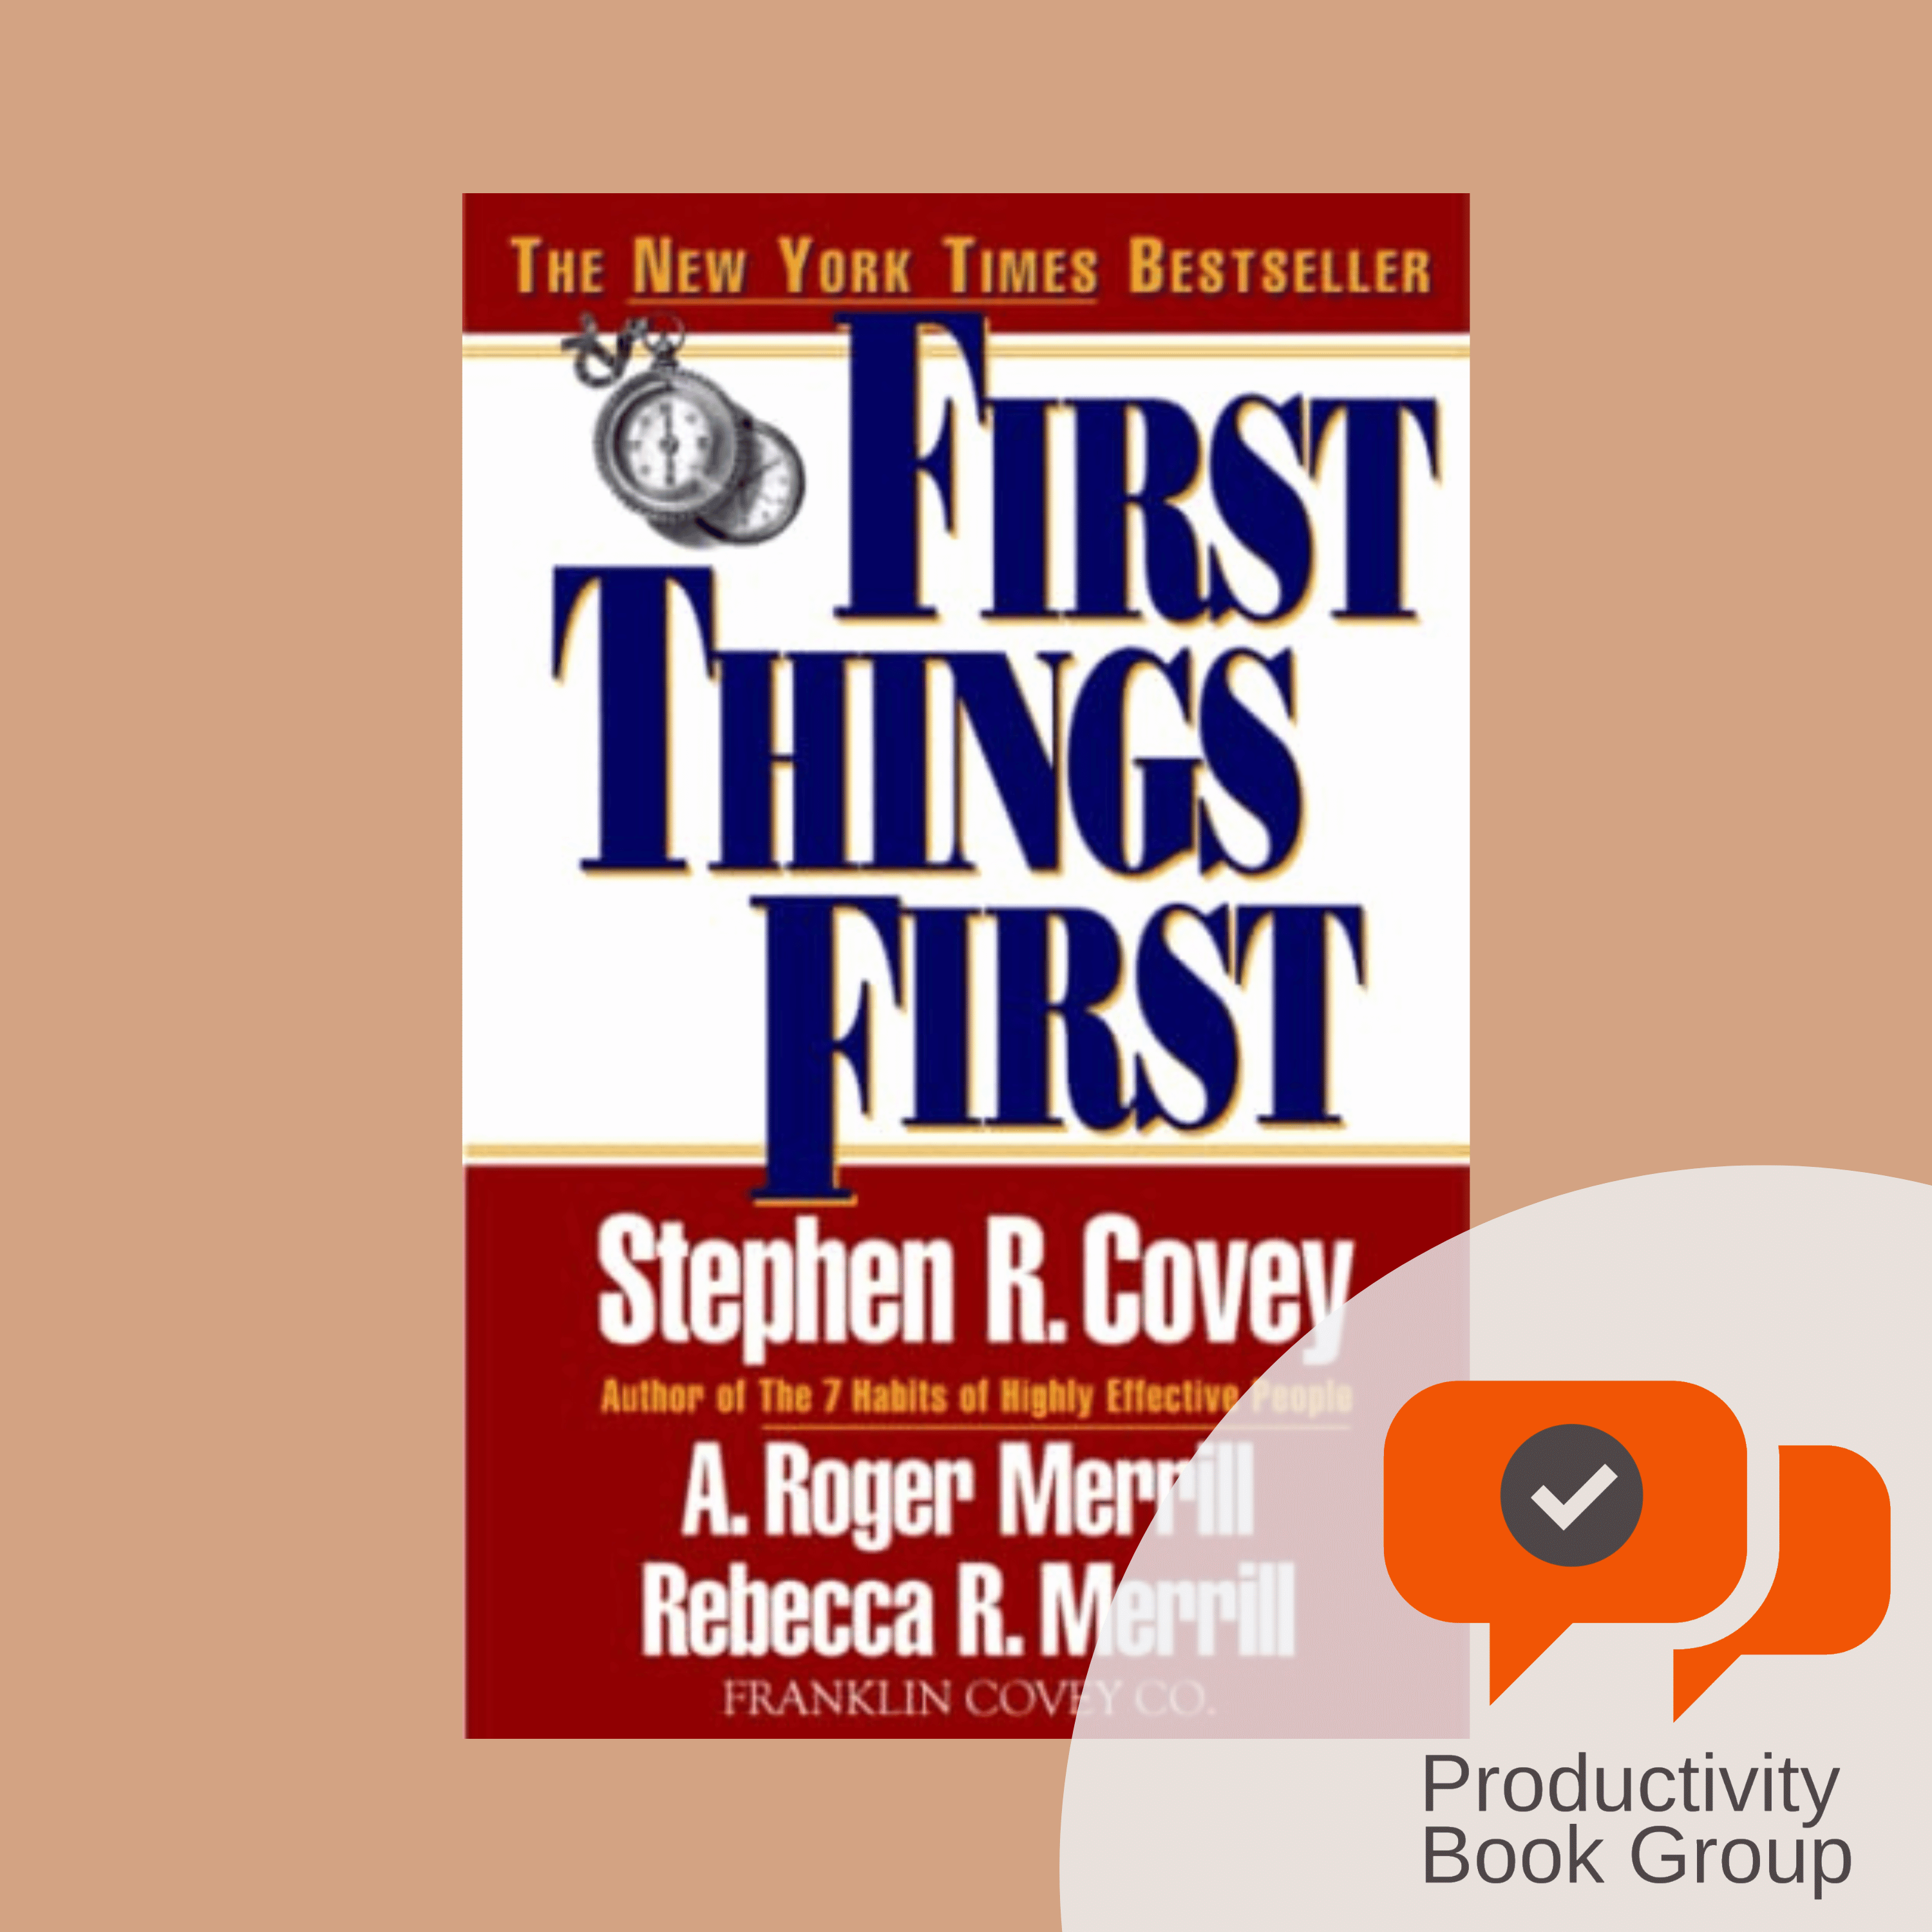 First Things First – Productivity Book Group